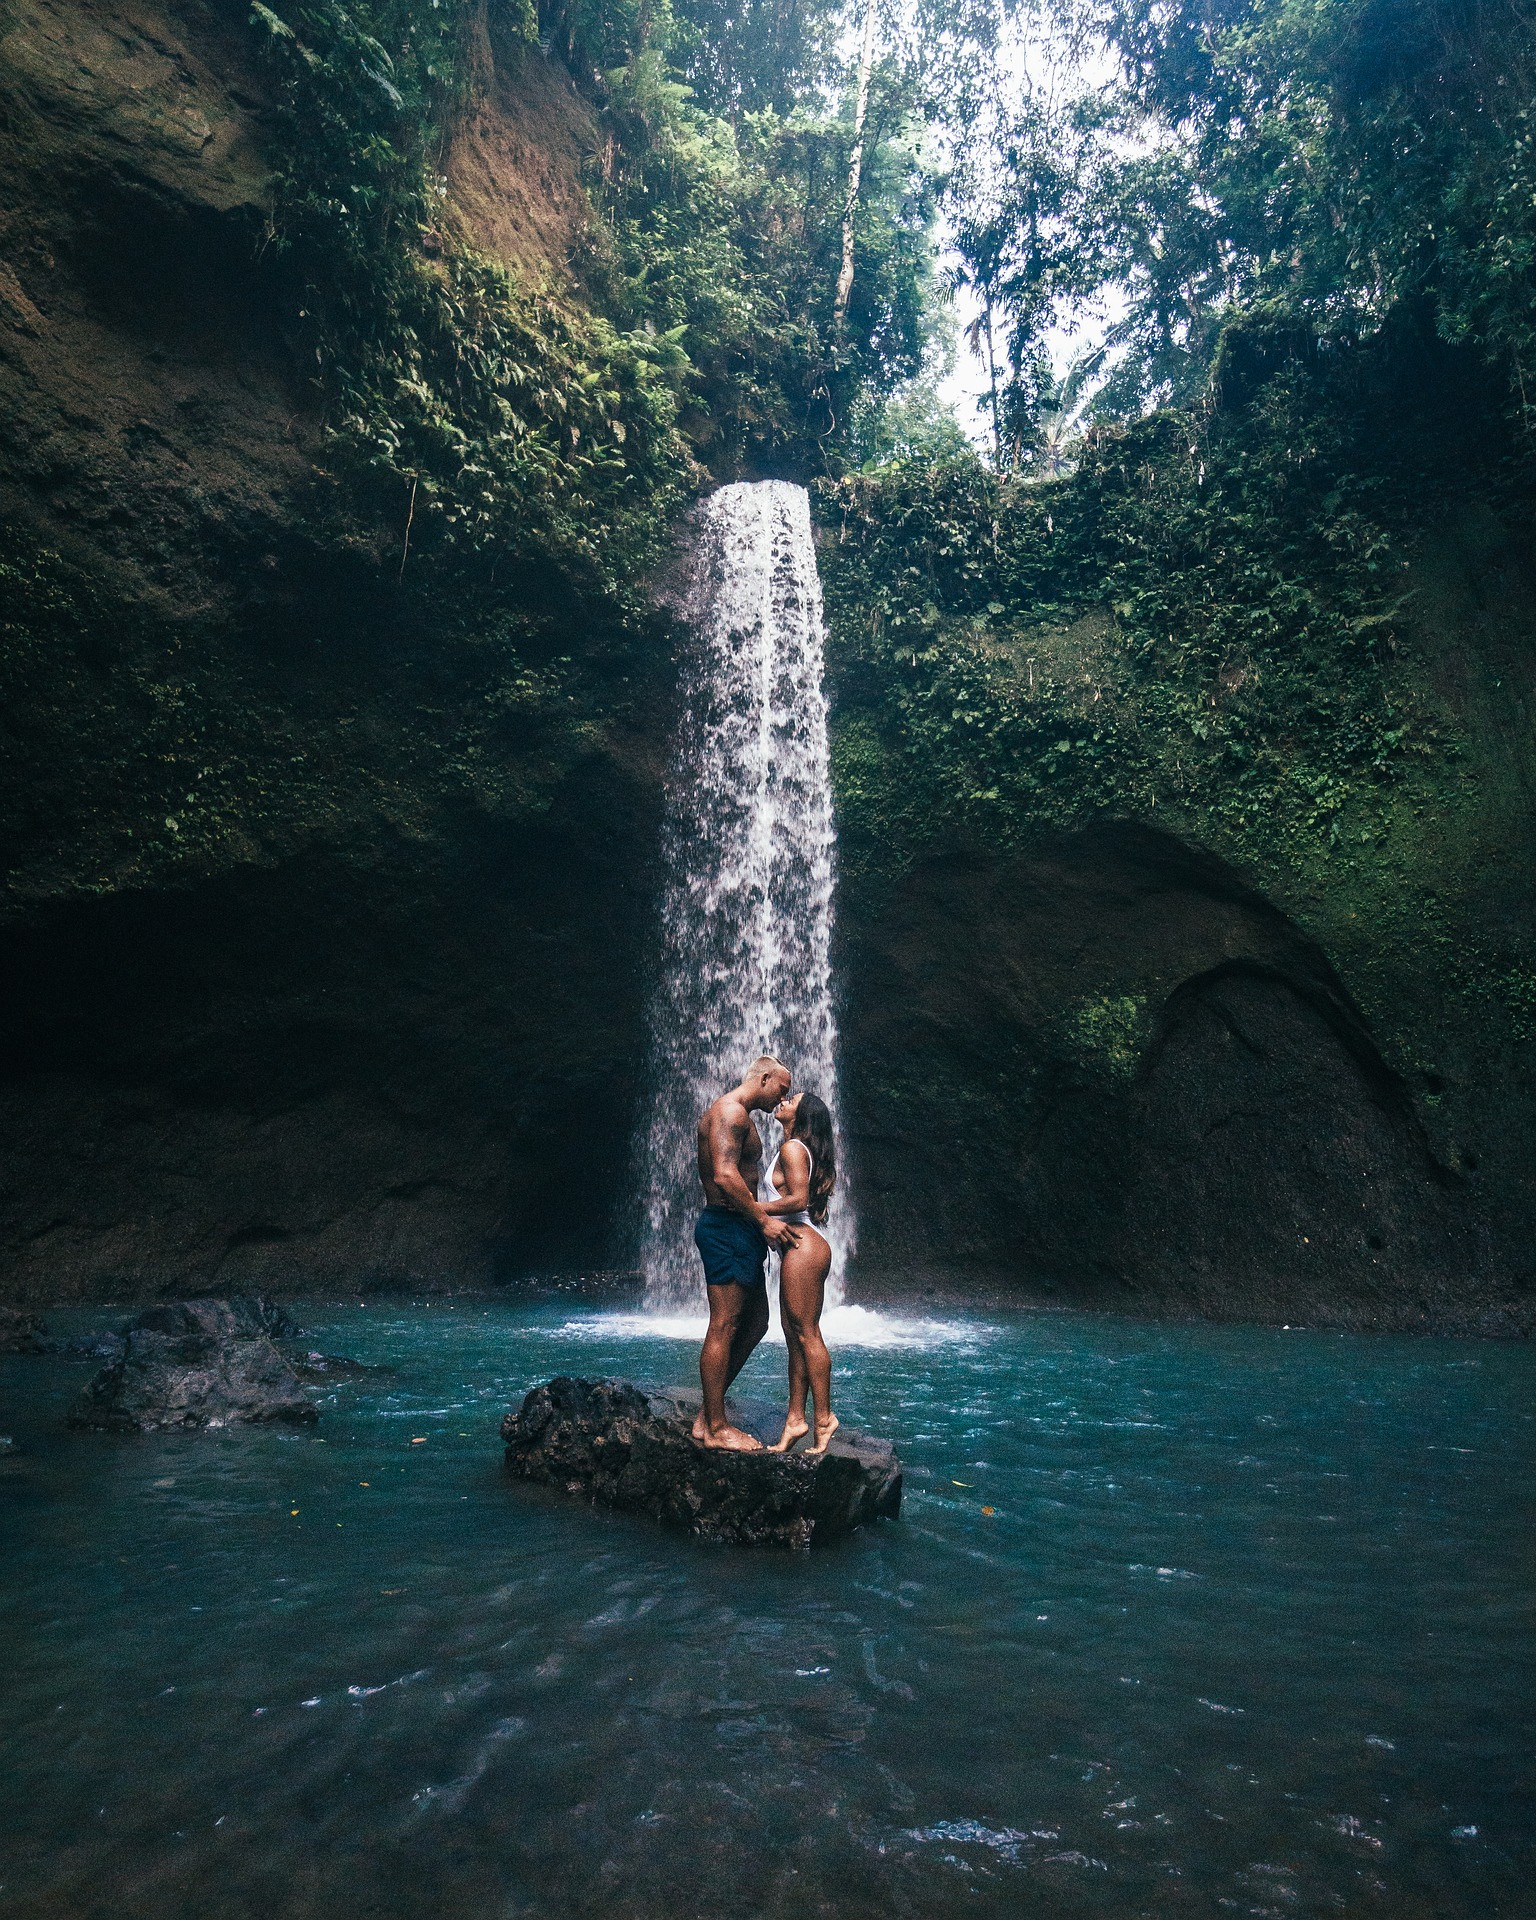 @projectfairytale: 5 Bucket List Places You’d Want to Spend Your Honeymoon